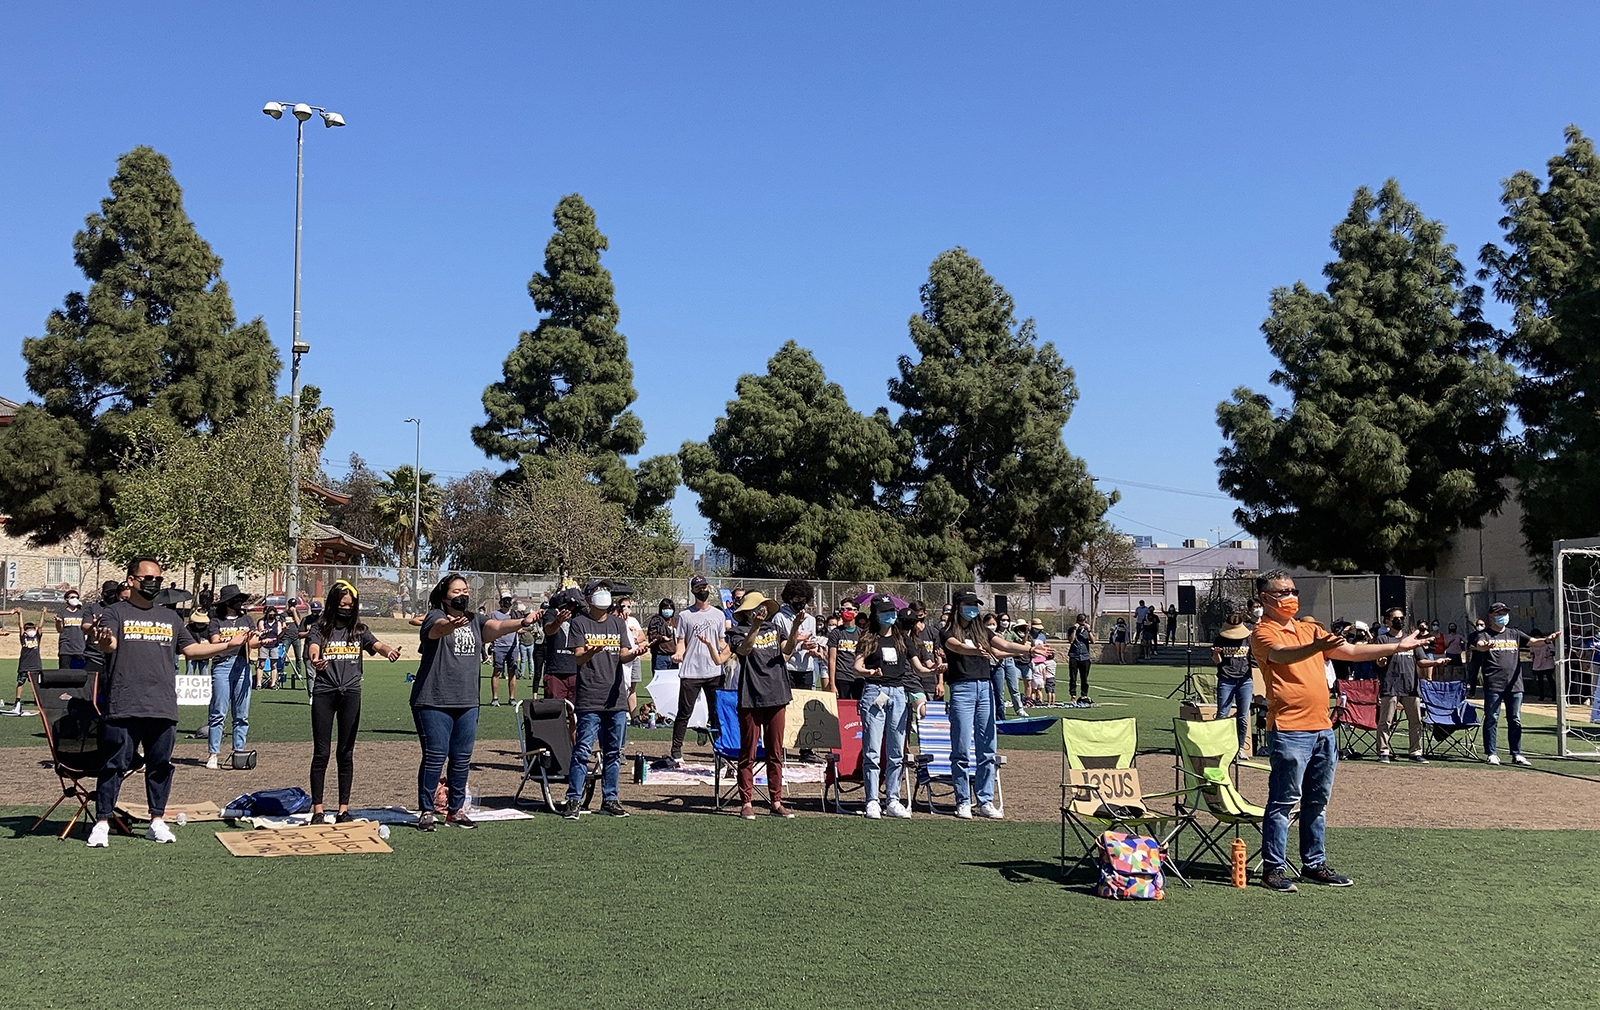 The Sunday, March 28, 2021, gathering at Seoul International Park in Los Angeles’ Koreatown resembled an outdoor church gathering with attendees sitting on lawn chairs and displaying signs that read “We Belong Here” and “Jesus Restores.” RNS photo by Alejandra Molina